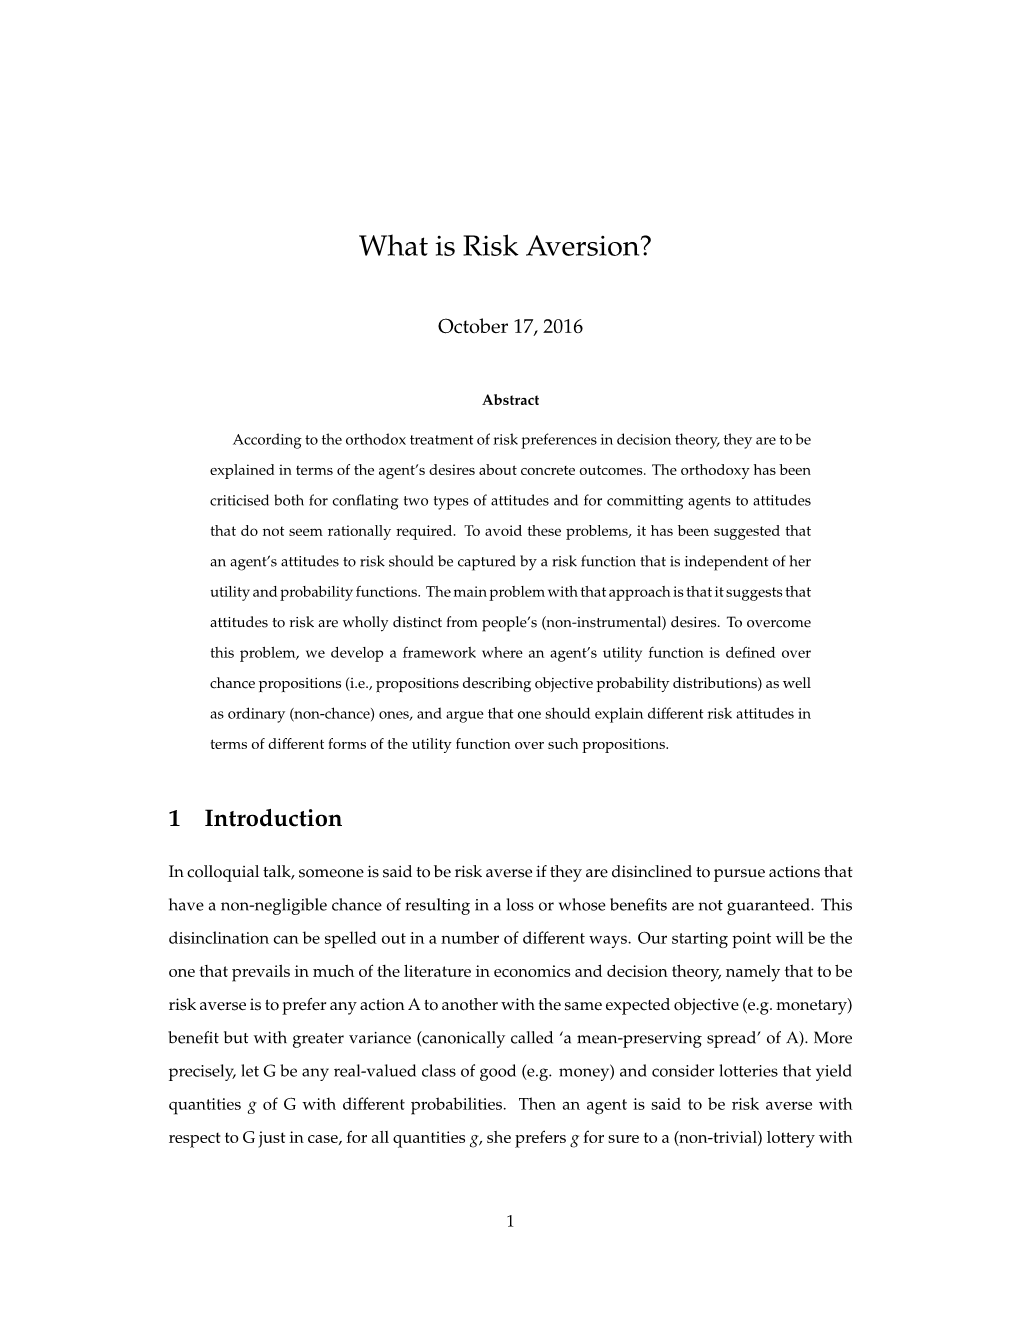 What Is Risk Aversion?